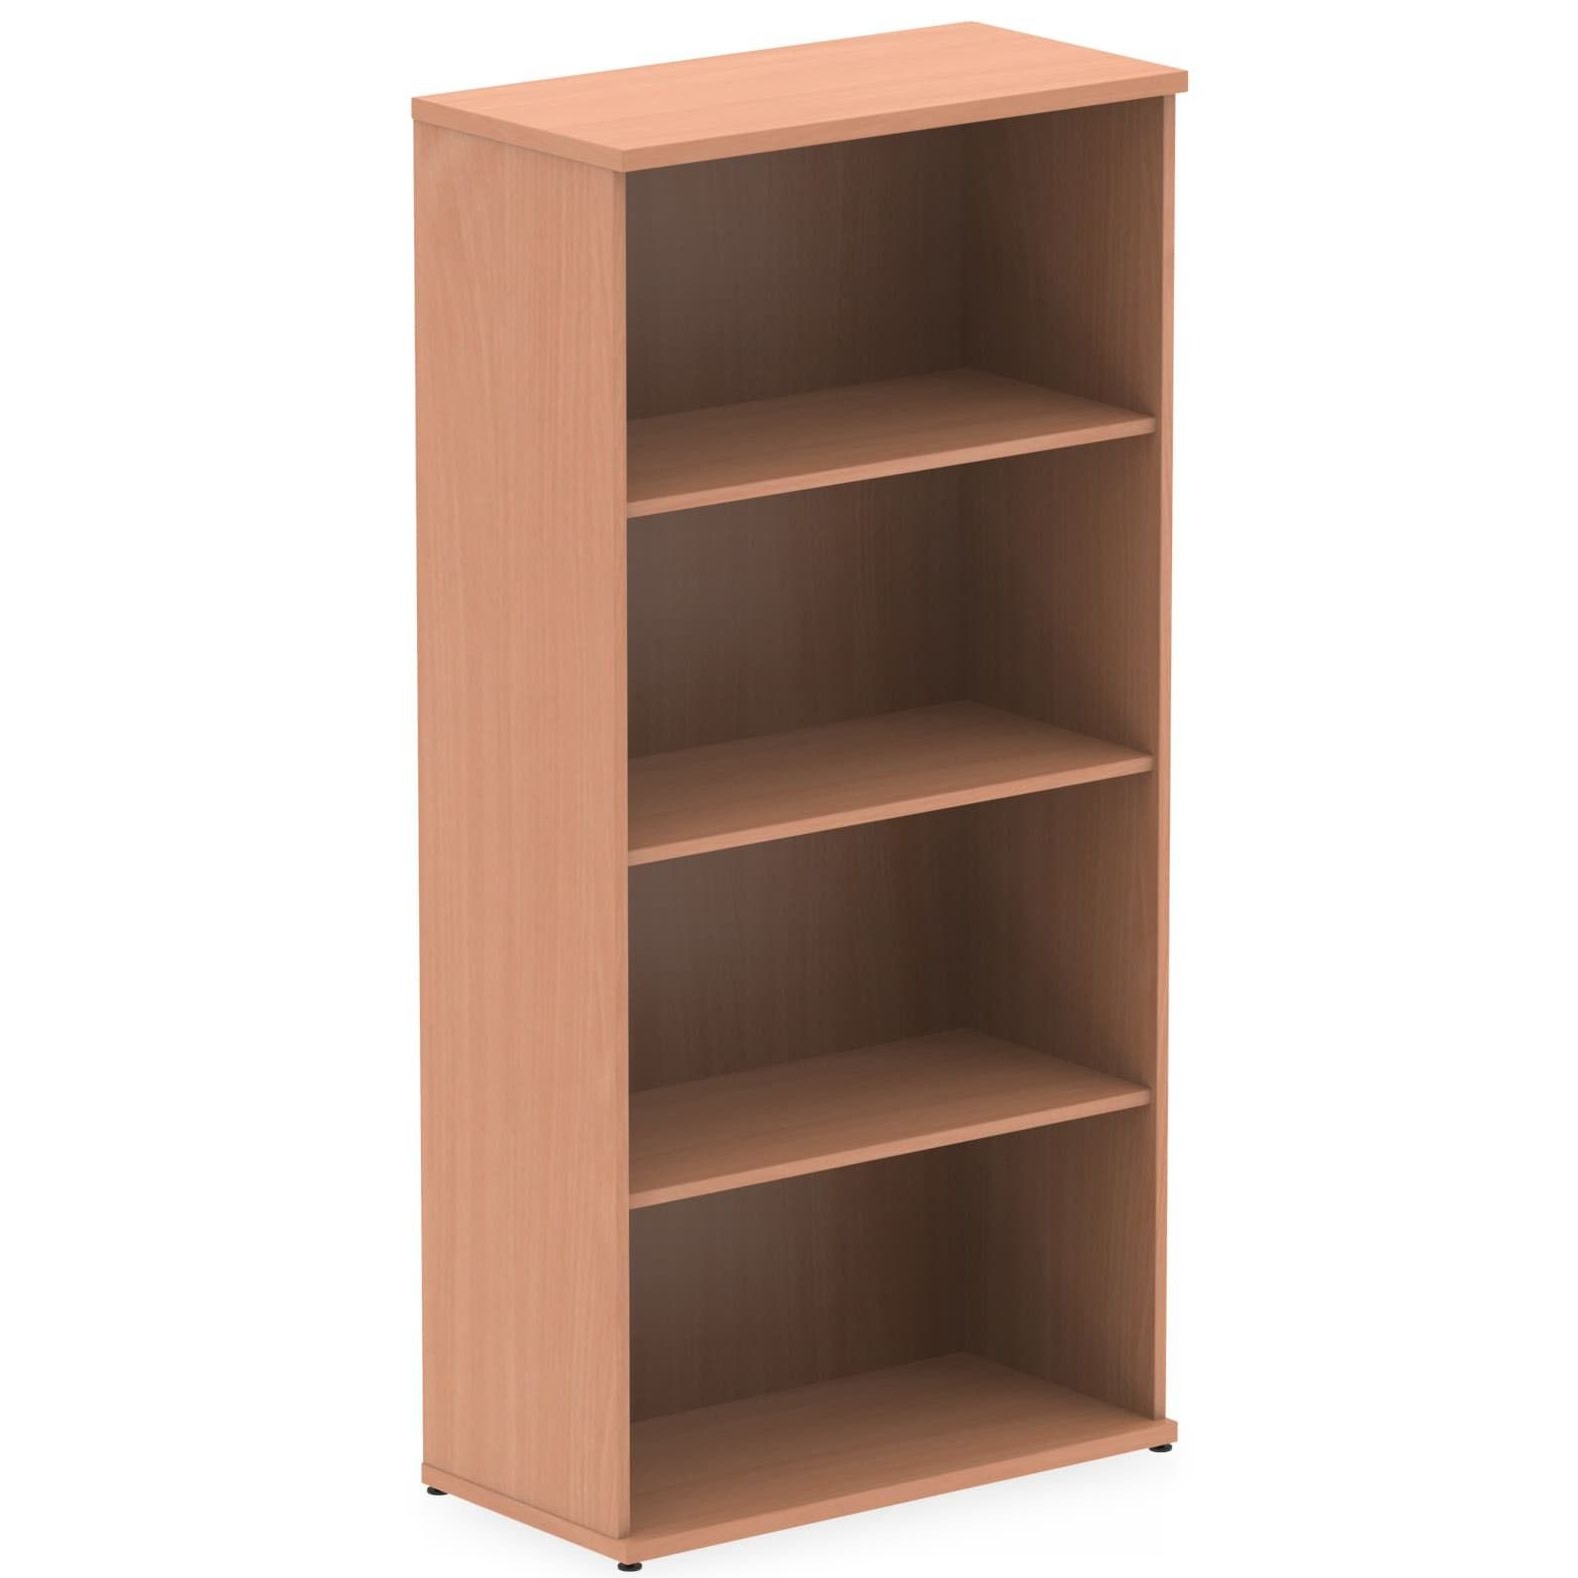 Flex Wooden Office Bookcases from our Office Bookcases range.